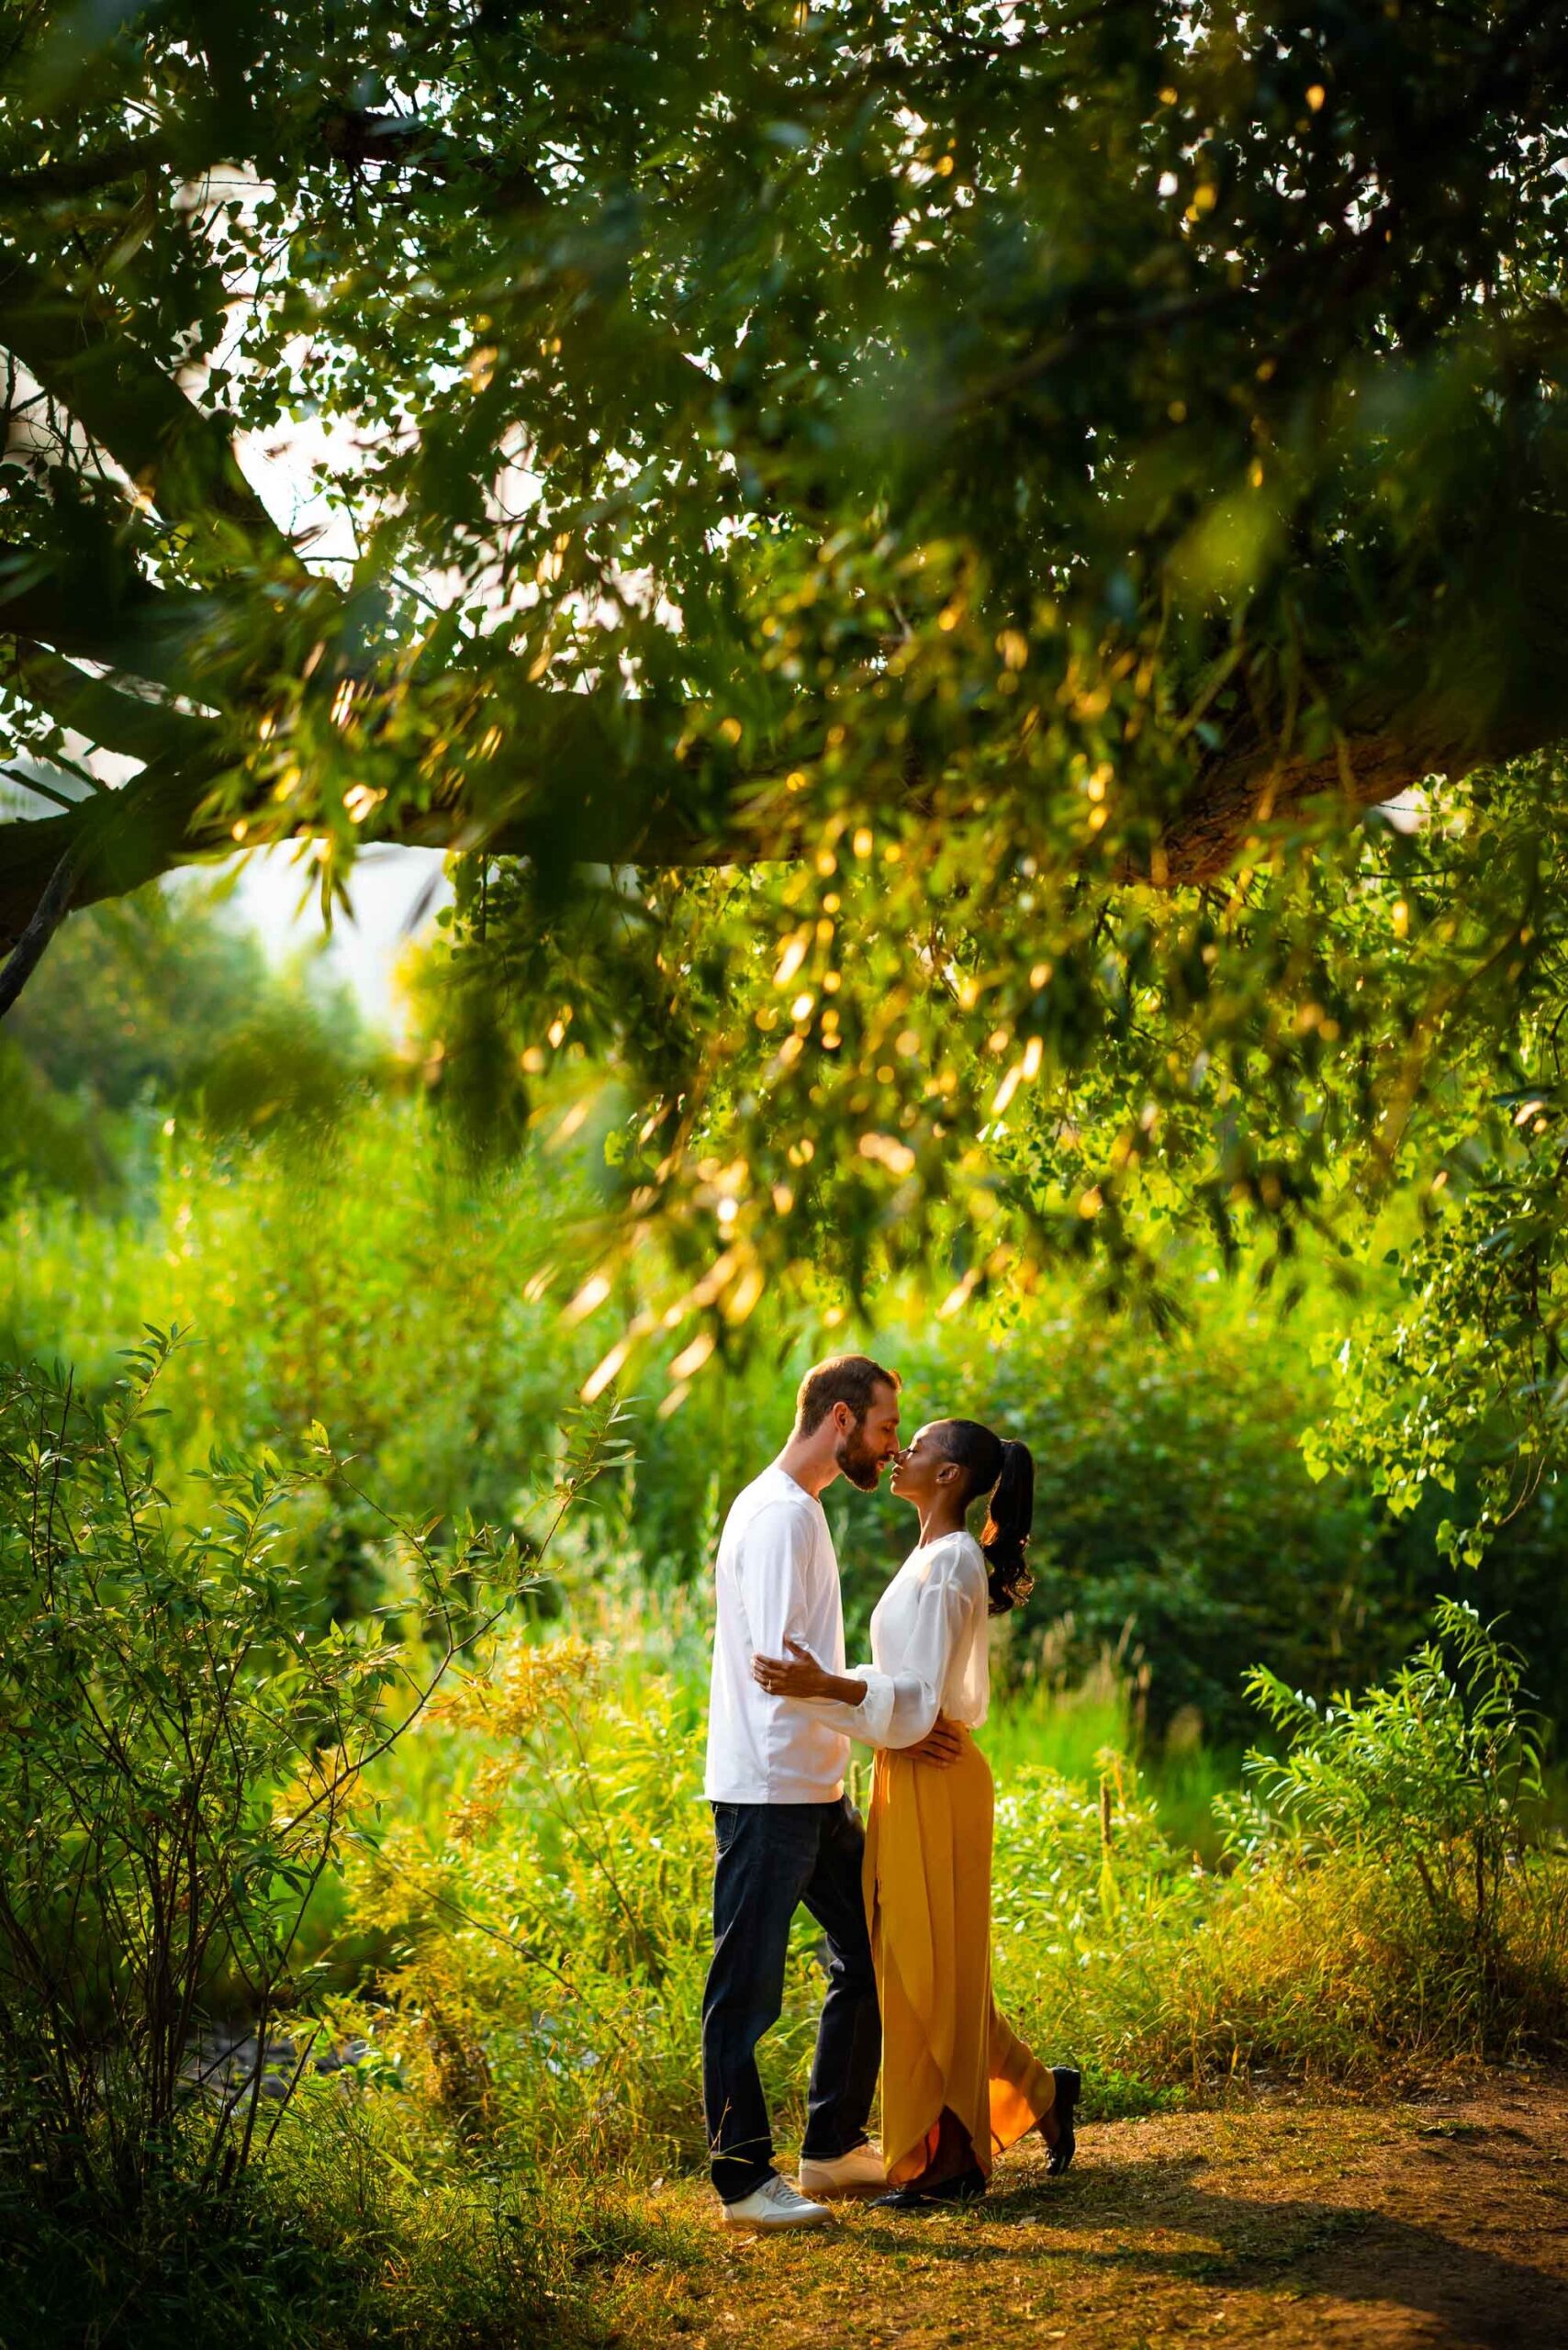 Engaged couple poses for engagement photos at Lair o' the Bear Park in Morrison, Colorado, Engagement Session, Engagement Photos, Engagement Photos Inspiration, Engagement Photography, Engagement Photographer, Lair o' the Bear,  Morrison Engagement Photos, Morrison engagement photos, Morrison engagement photographer, Colorado engagement photos, Colorado engagement photography, Colorado engagement photographer, Colorado engagement inspiration